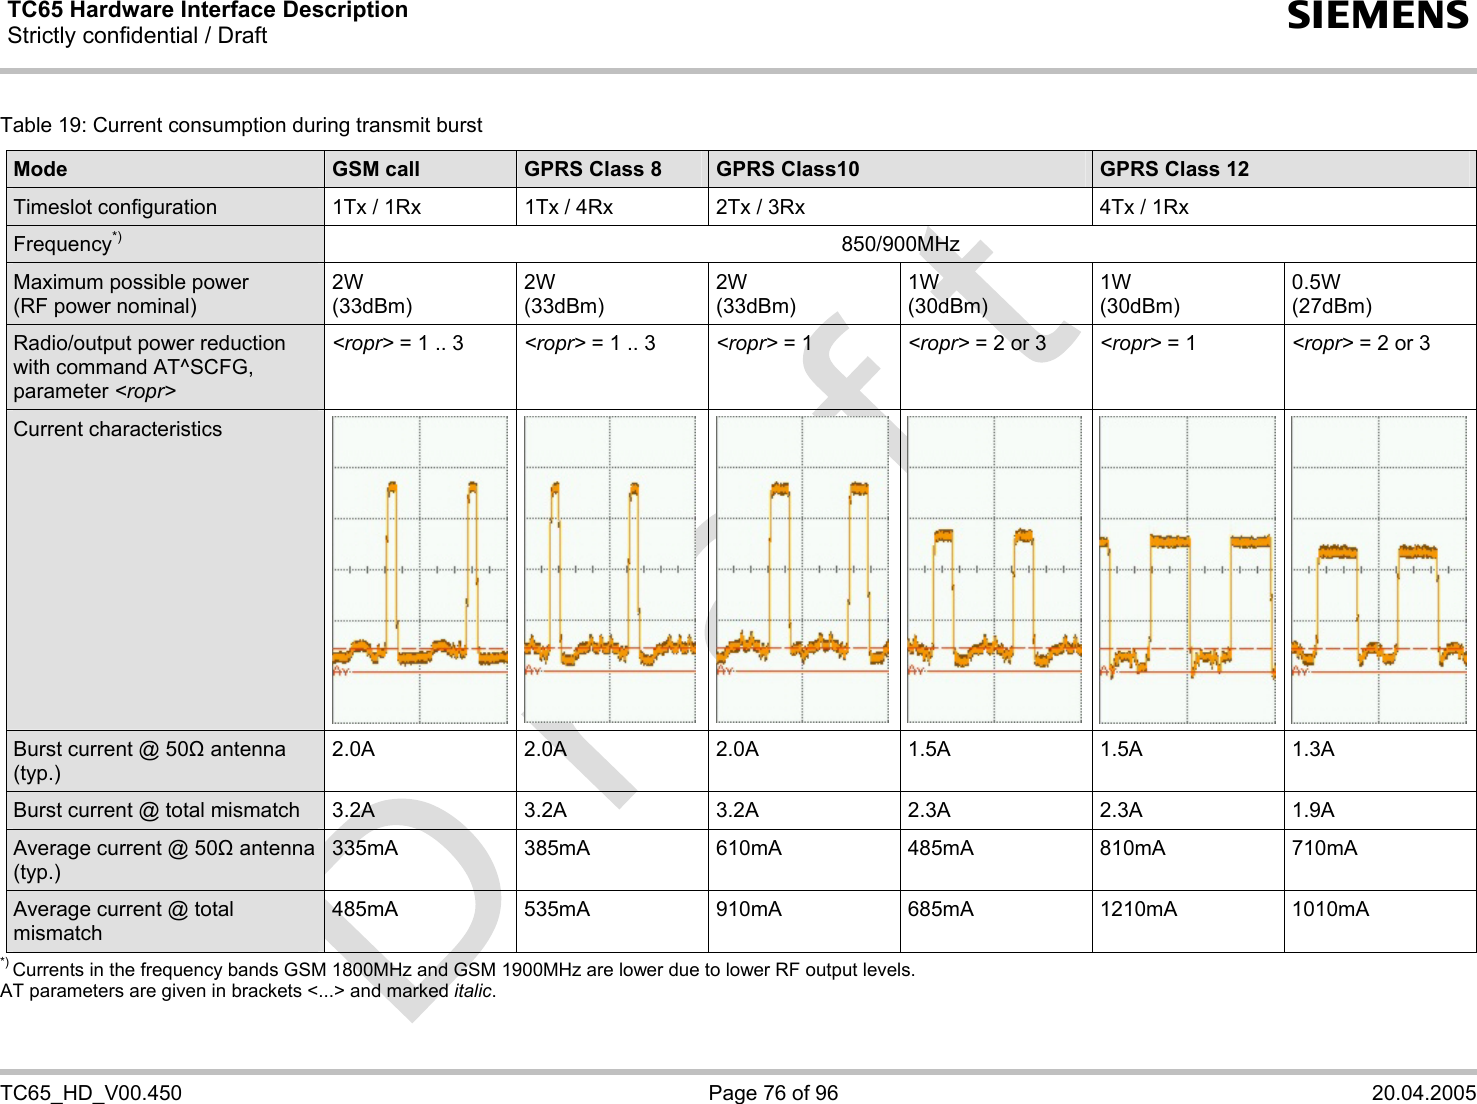 TC65 Hardware Interface Description Strictly confidential / Draft  s   TC65_HD_V00.450  Page 76 of 96  20.04.2005 Table 19: Current consumption during transmit burst Mode  GSM call  GPRS Class 8  GPRS Class10  GPRS Class 12 Timeslot configuration  1Tx / 1Rx  1Tx / 4Rx  2Tx / 3Rx  4Tx / 1Rx Frequency*) 850/900MHz Maximum possible power  (RF power nominal) 2W (33dBm) 2W (33dBm) 2W (33dBm) 1W (30dBm) 1W (30dBm) 0.5W (27dBm) Radio/output power reduction with command AT^SCFG, parameter &lt;ropr&gt; &lt;ropr&gt; = 1 .. 3  &lt;ropr&gt; = 1 .. 3  &lt;ropr&gt; = 1  &lt;ropr&gt; = 2 or 3  &lt;ropr&gt; = 1  &lt;ropr&gt; = 2 or 3  Current characteristics    Burst current @ 50Ω antenna (typ.) 2.0A 2.0A 2.0A 1.5A 1.5A 1.3A Burst current @ total mismatch  3.2A 3.2A 3.2A 2.3A 2.3A 1.9A Average current @ 50Ω antenna (typ.) 335mA 385mA 610mA 485mA 810mA 710mA Average current @ total mismatch 485mA 535mA 910mA 685mA 1210mA 1010mA *) Currents in the frequency bands GSM 1800MHz and GSM 1900MHz are lower due to lower RF output levels. AT parameters are given in brackets &lt;...&gt; and marked italic. 